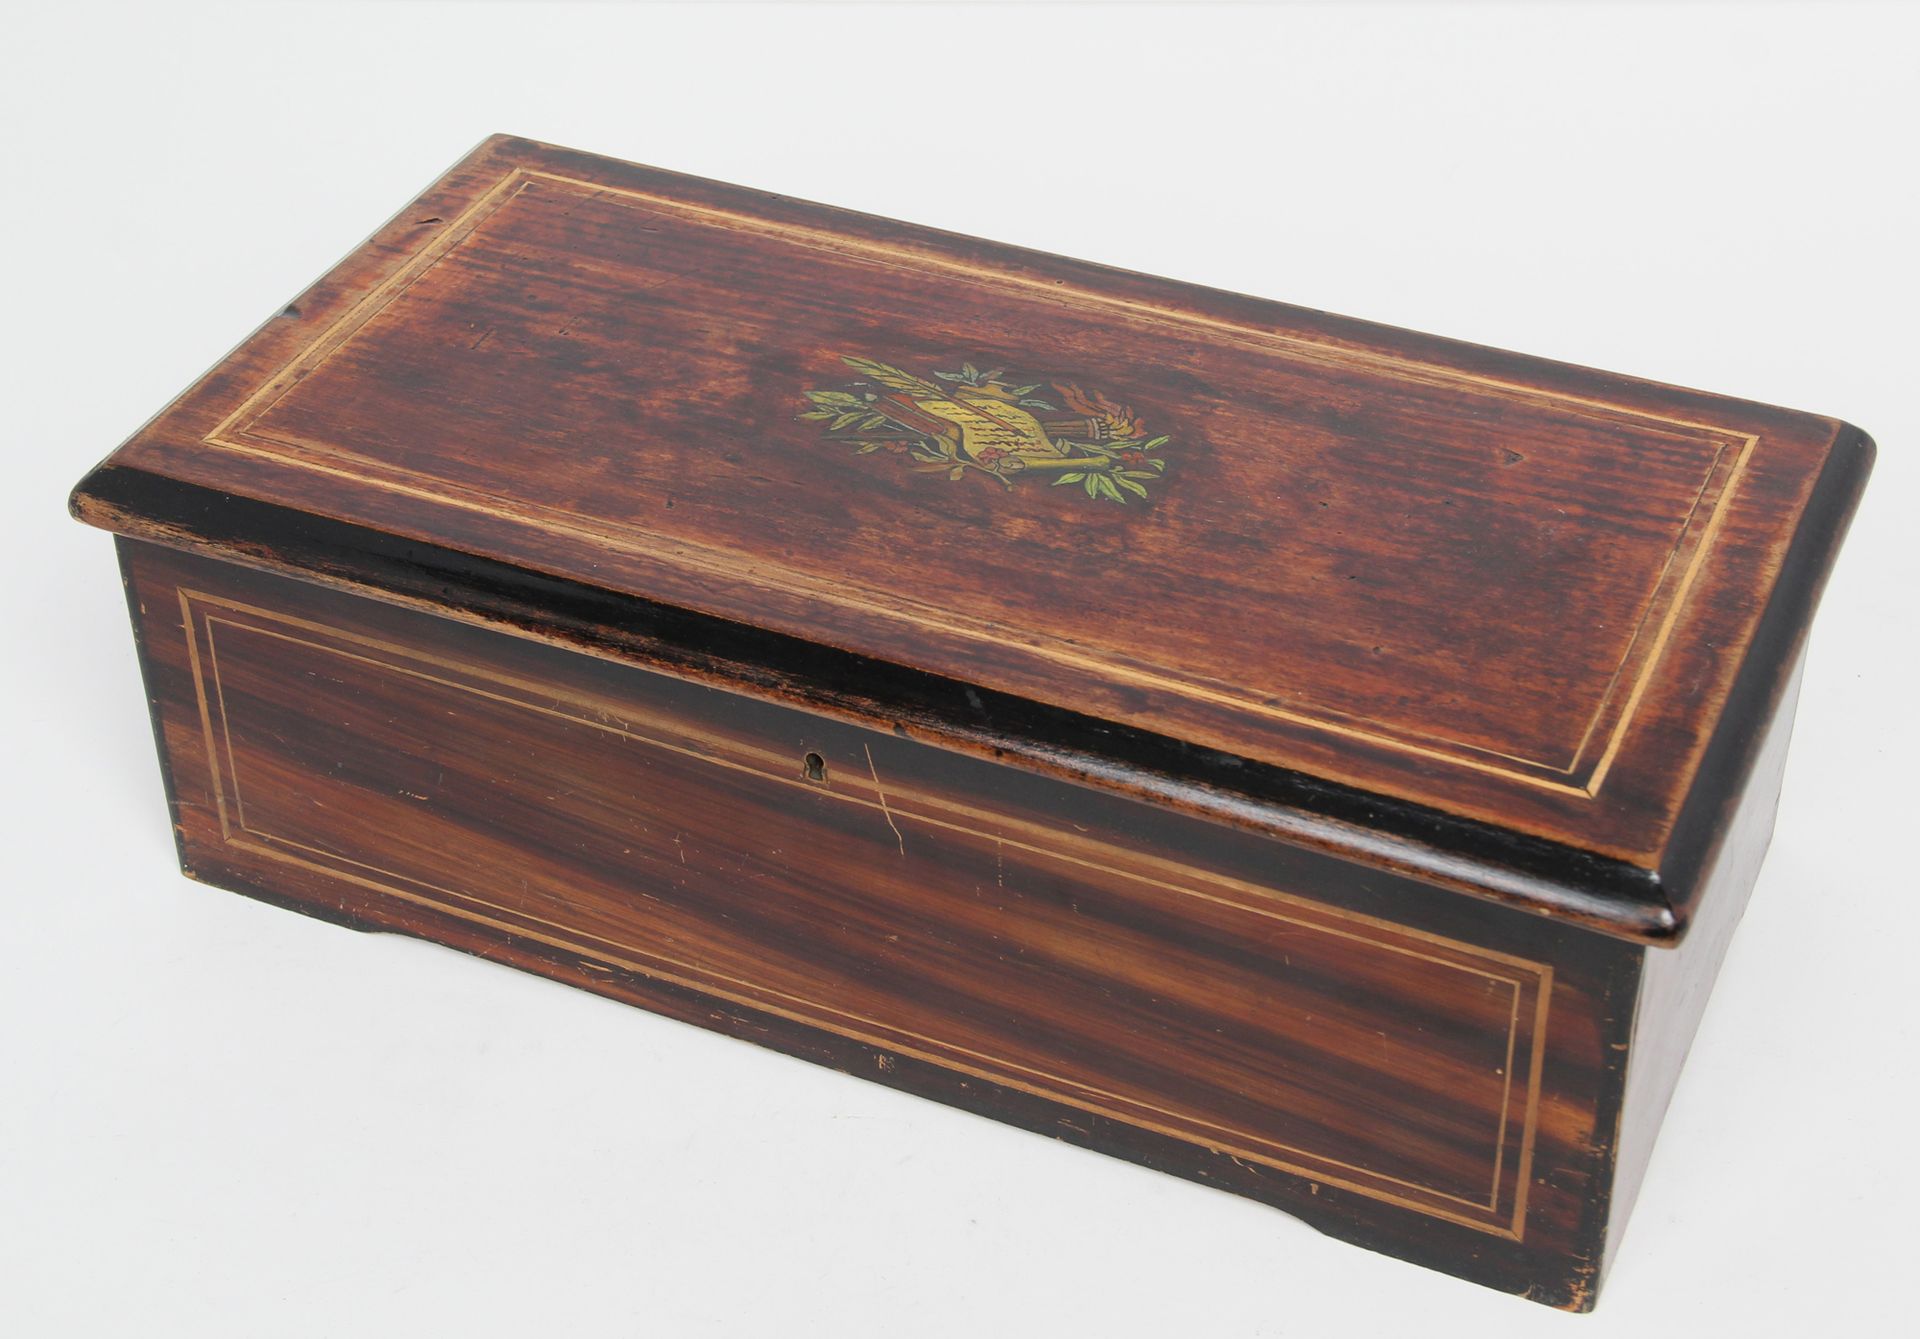 Null MUSIC BOX

in a wooden case, lid decorated with stained wood marquetry depi&hellip;